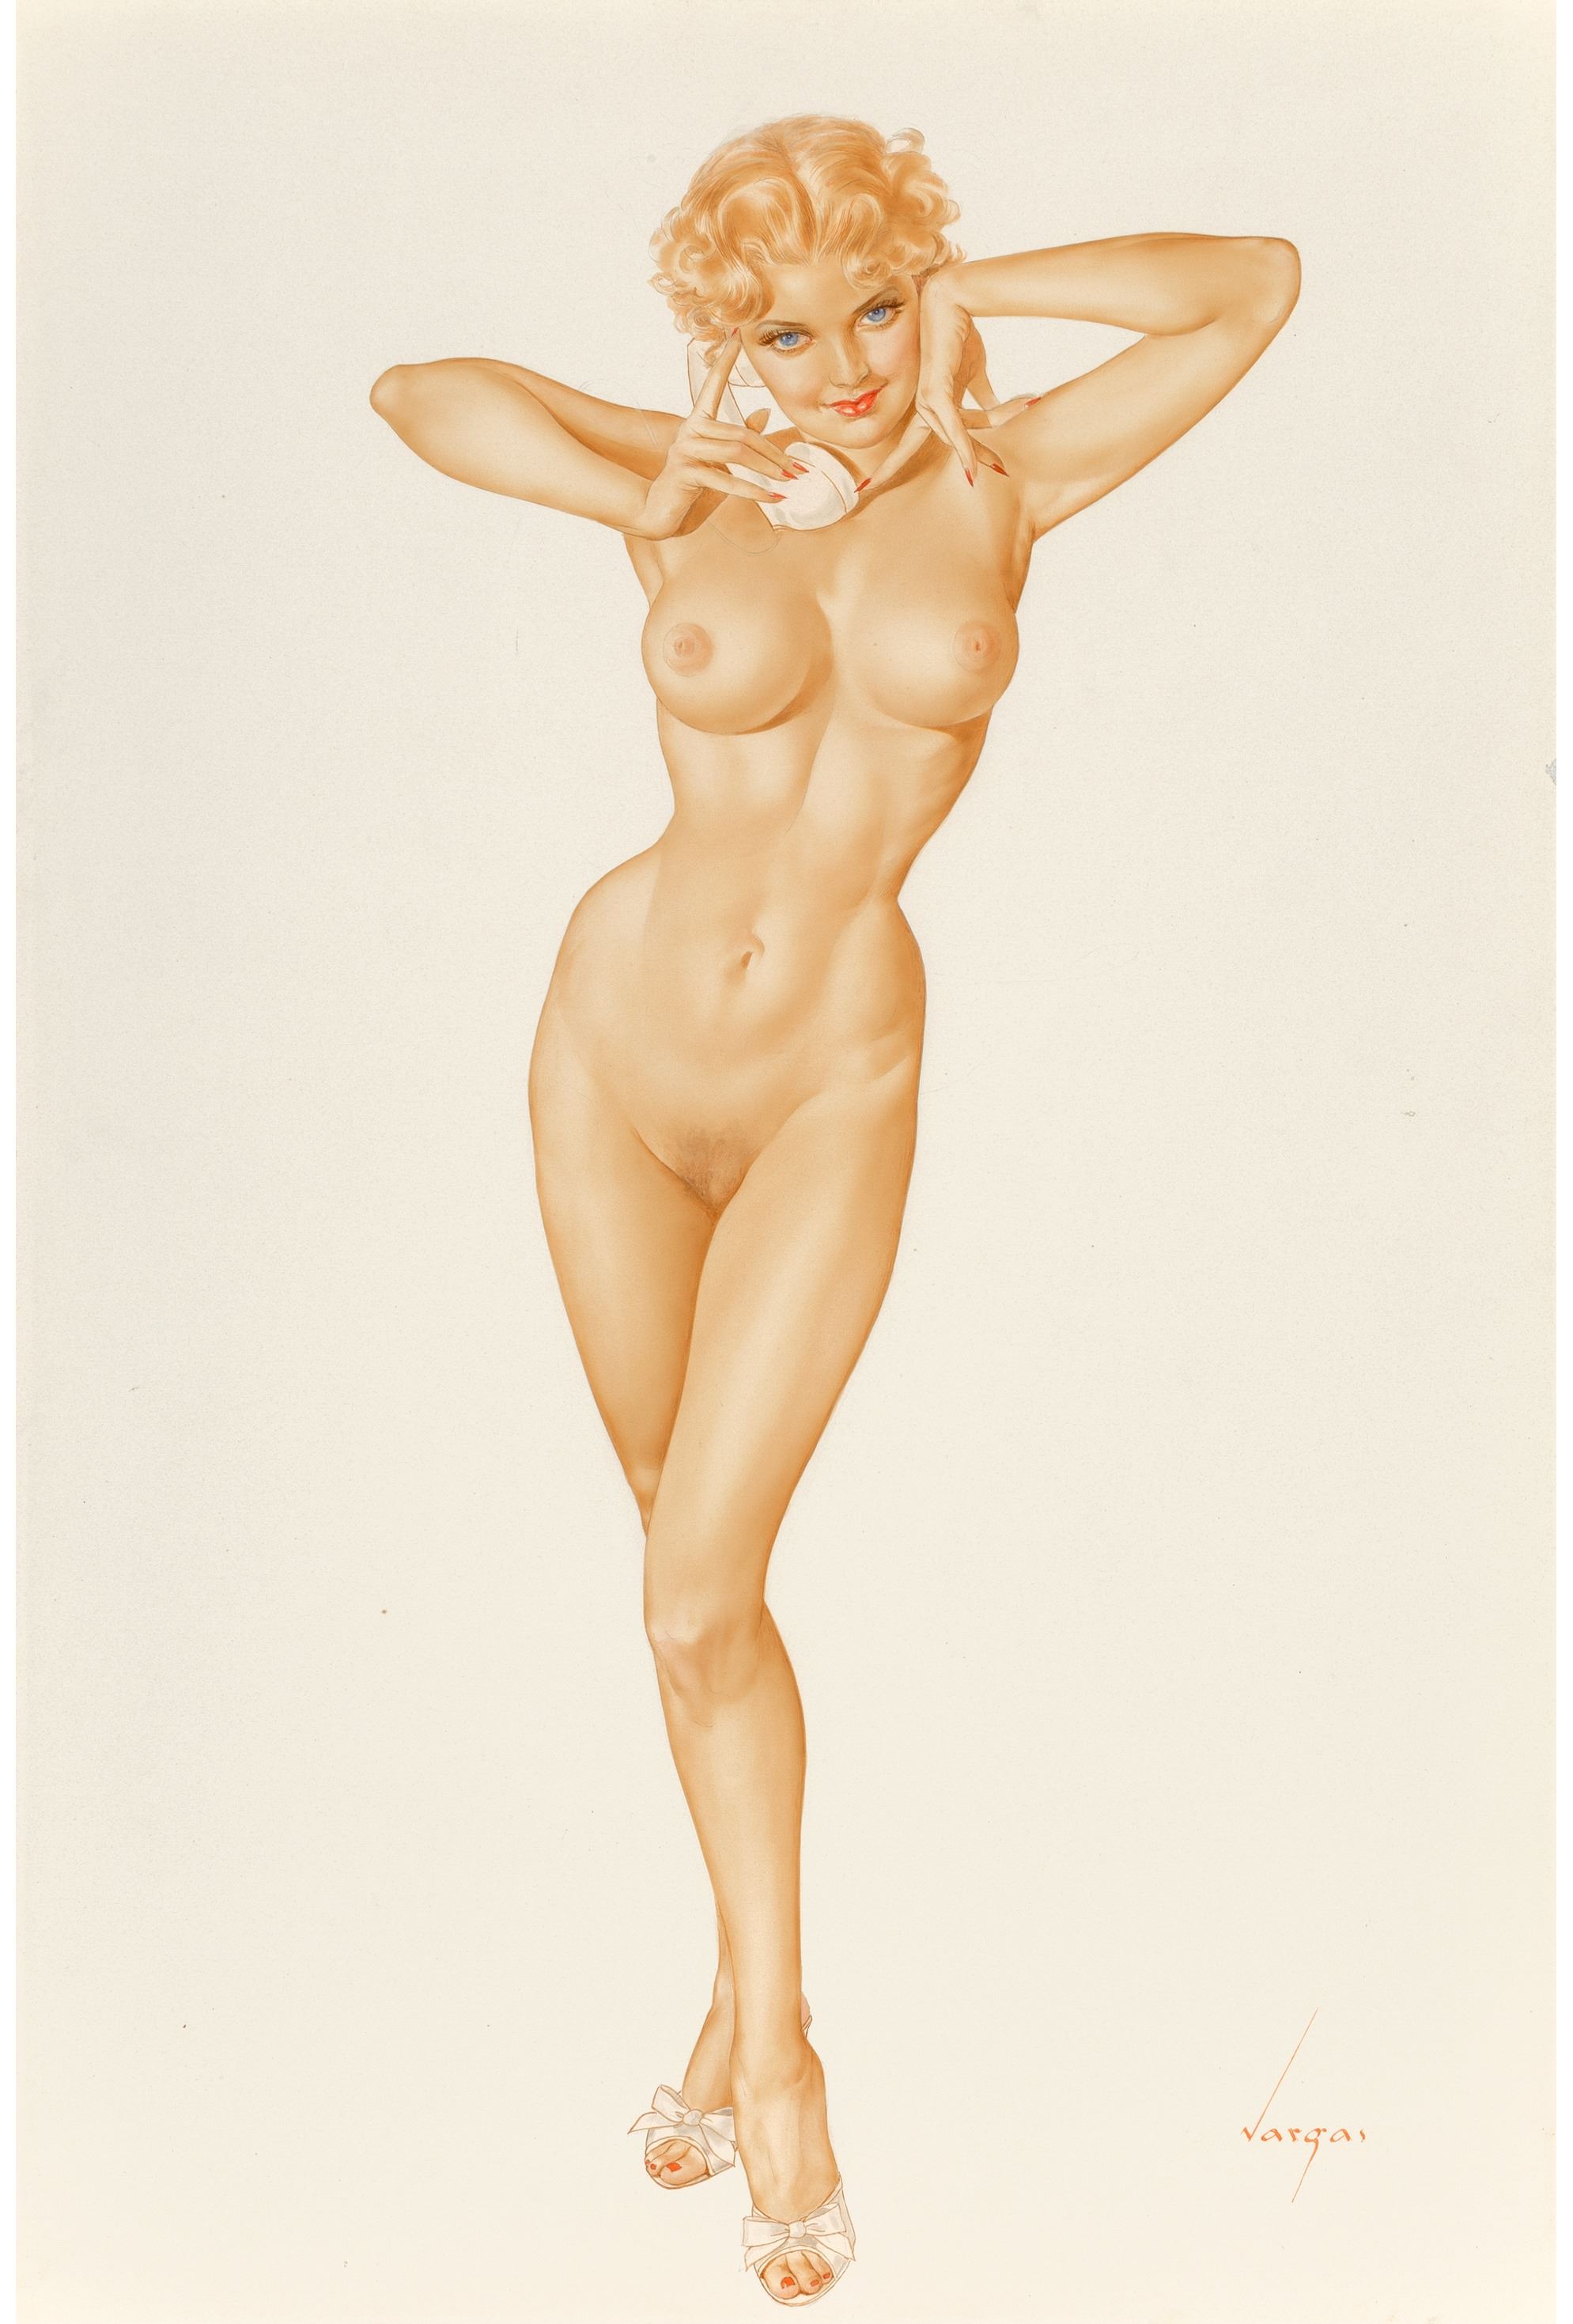 Nude with Phone (Jeanne Dean) by Alberto Vargas, 1946